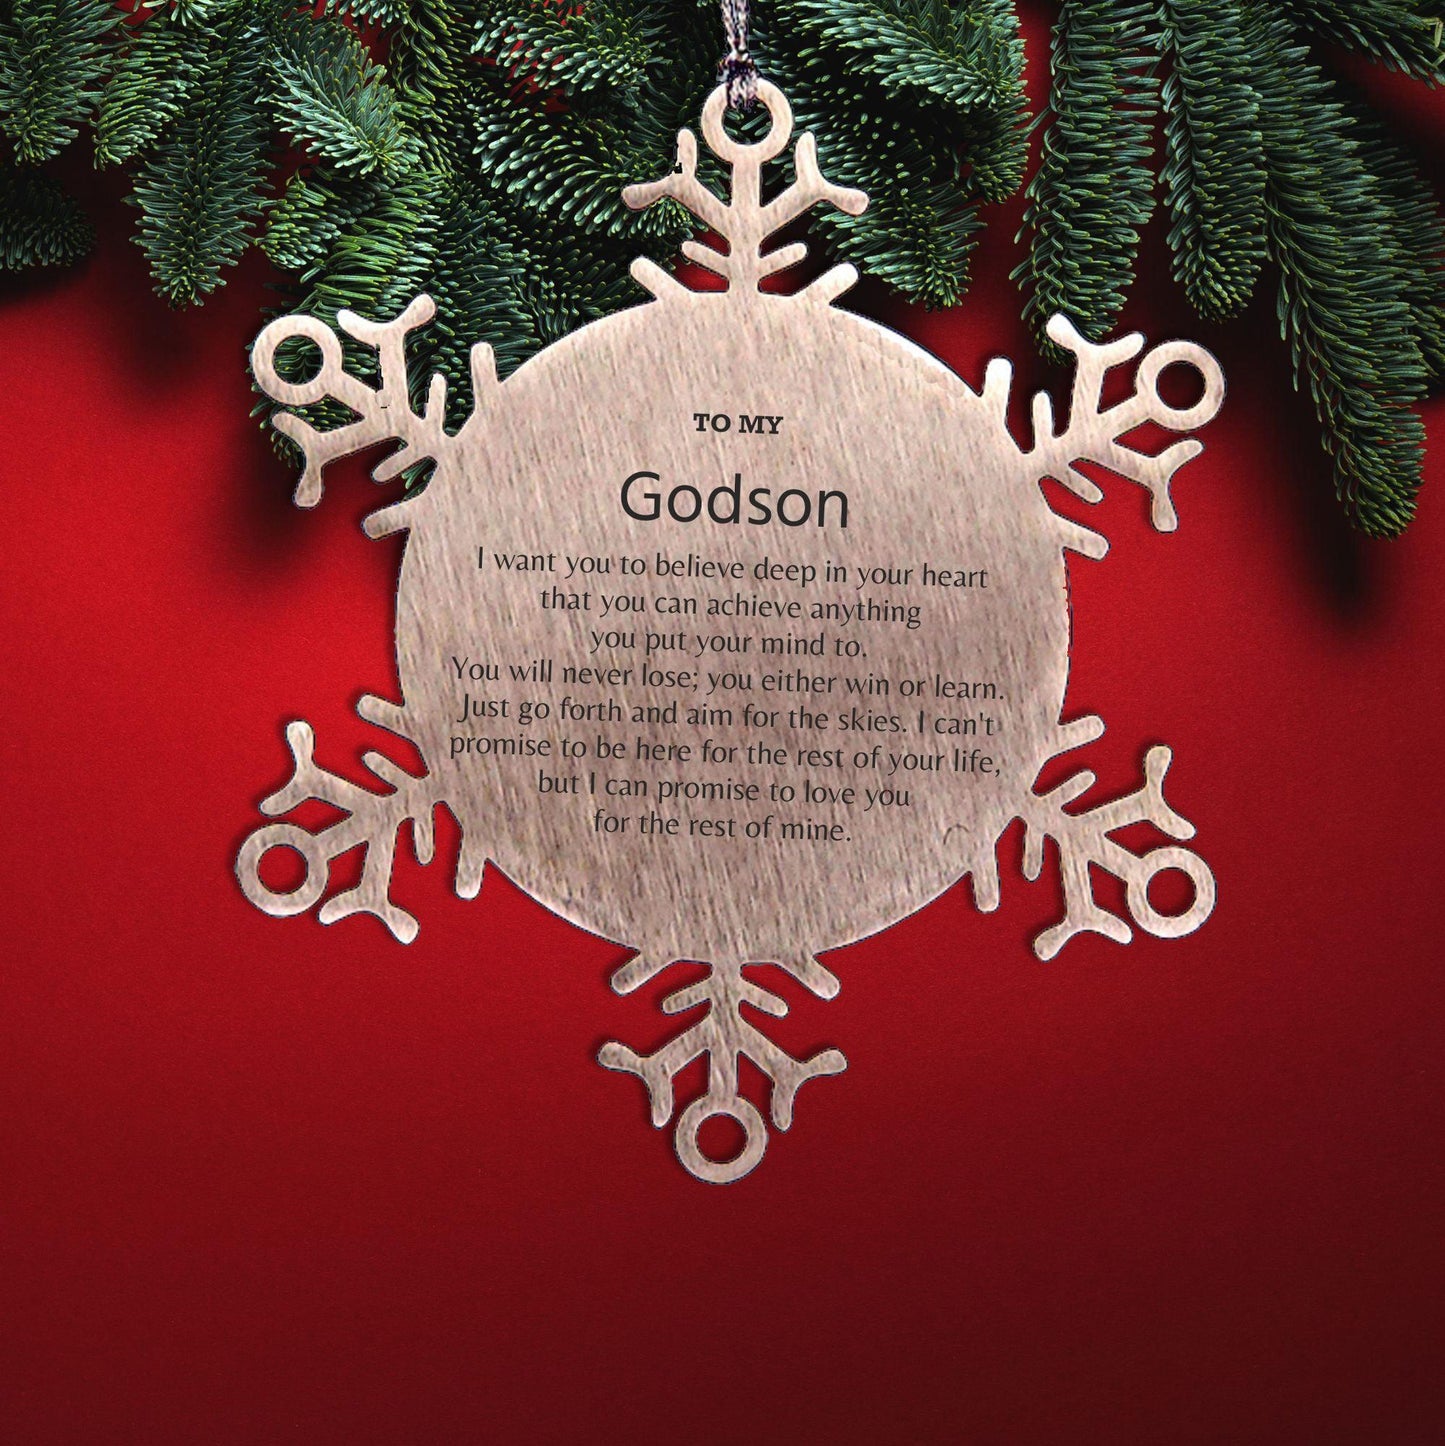 Motivational Godson Snowflake Ornament, Godson I can promise to love you for the rest of mine, Christmas Birthday Gift - Mallard Moon Gift Shop